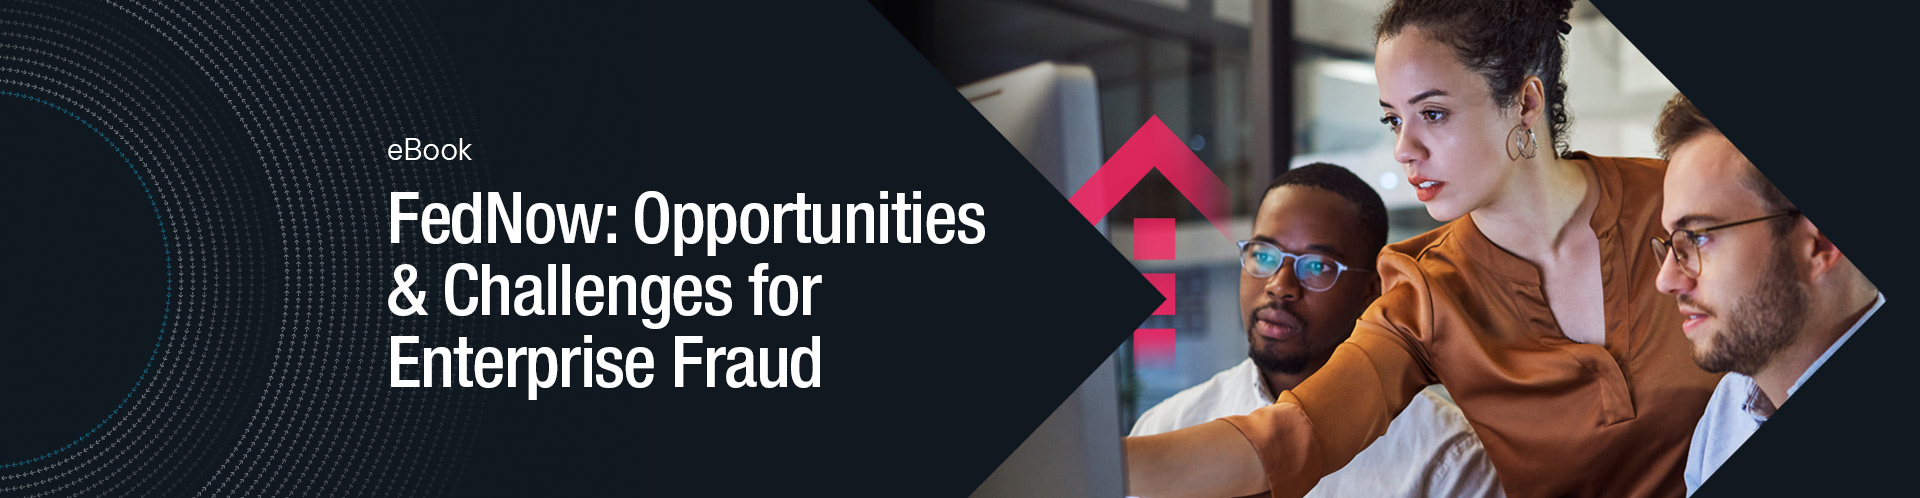 FedNow: Opportunities and Challenges for Enterprise Fraud